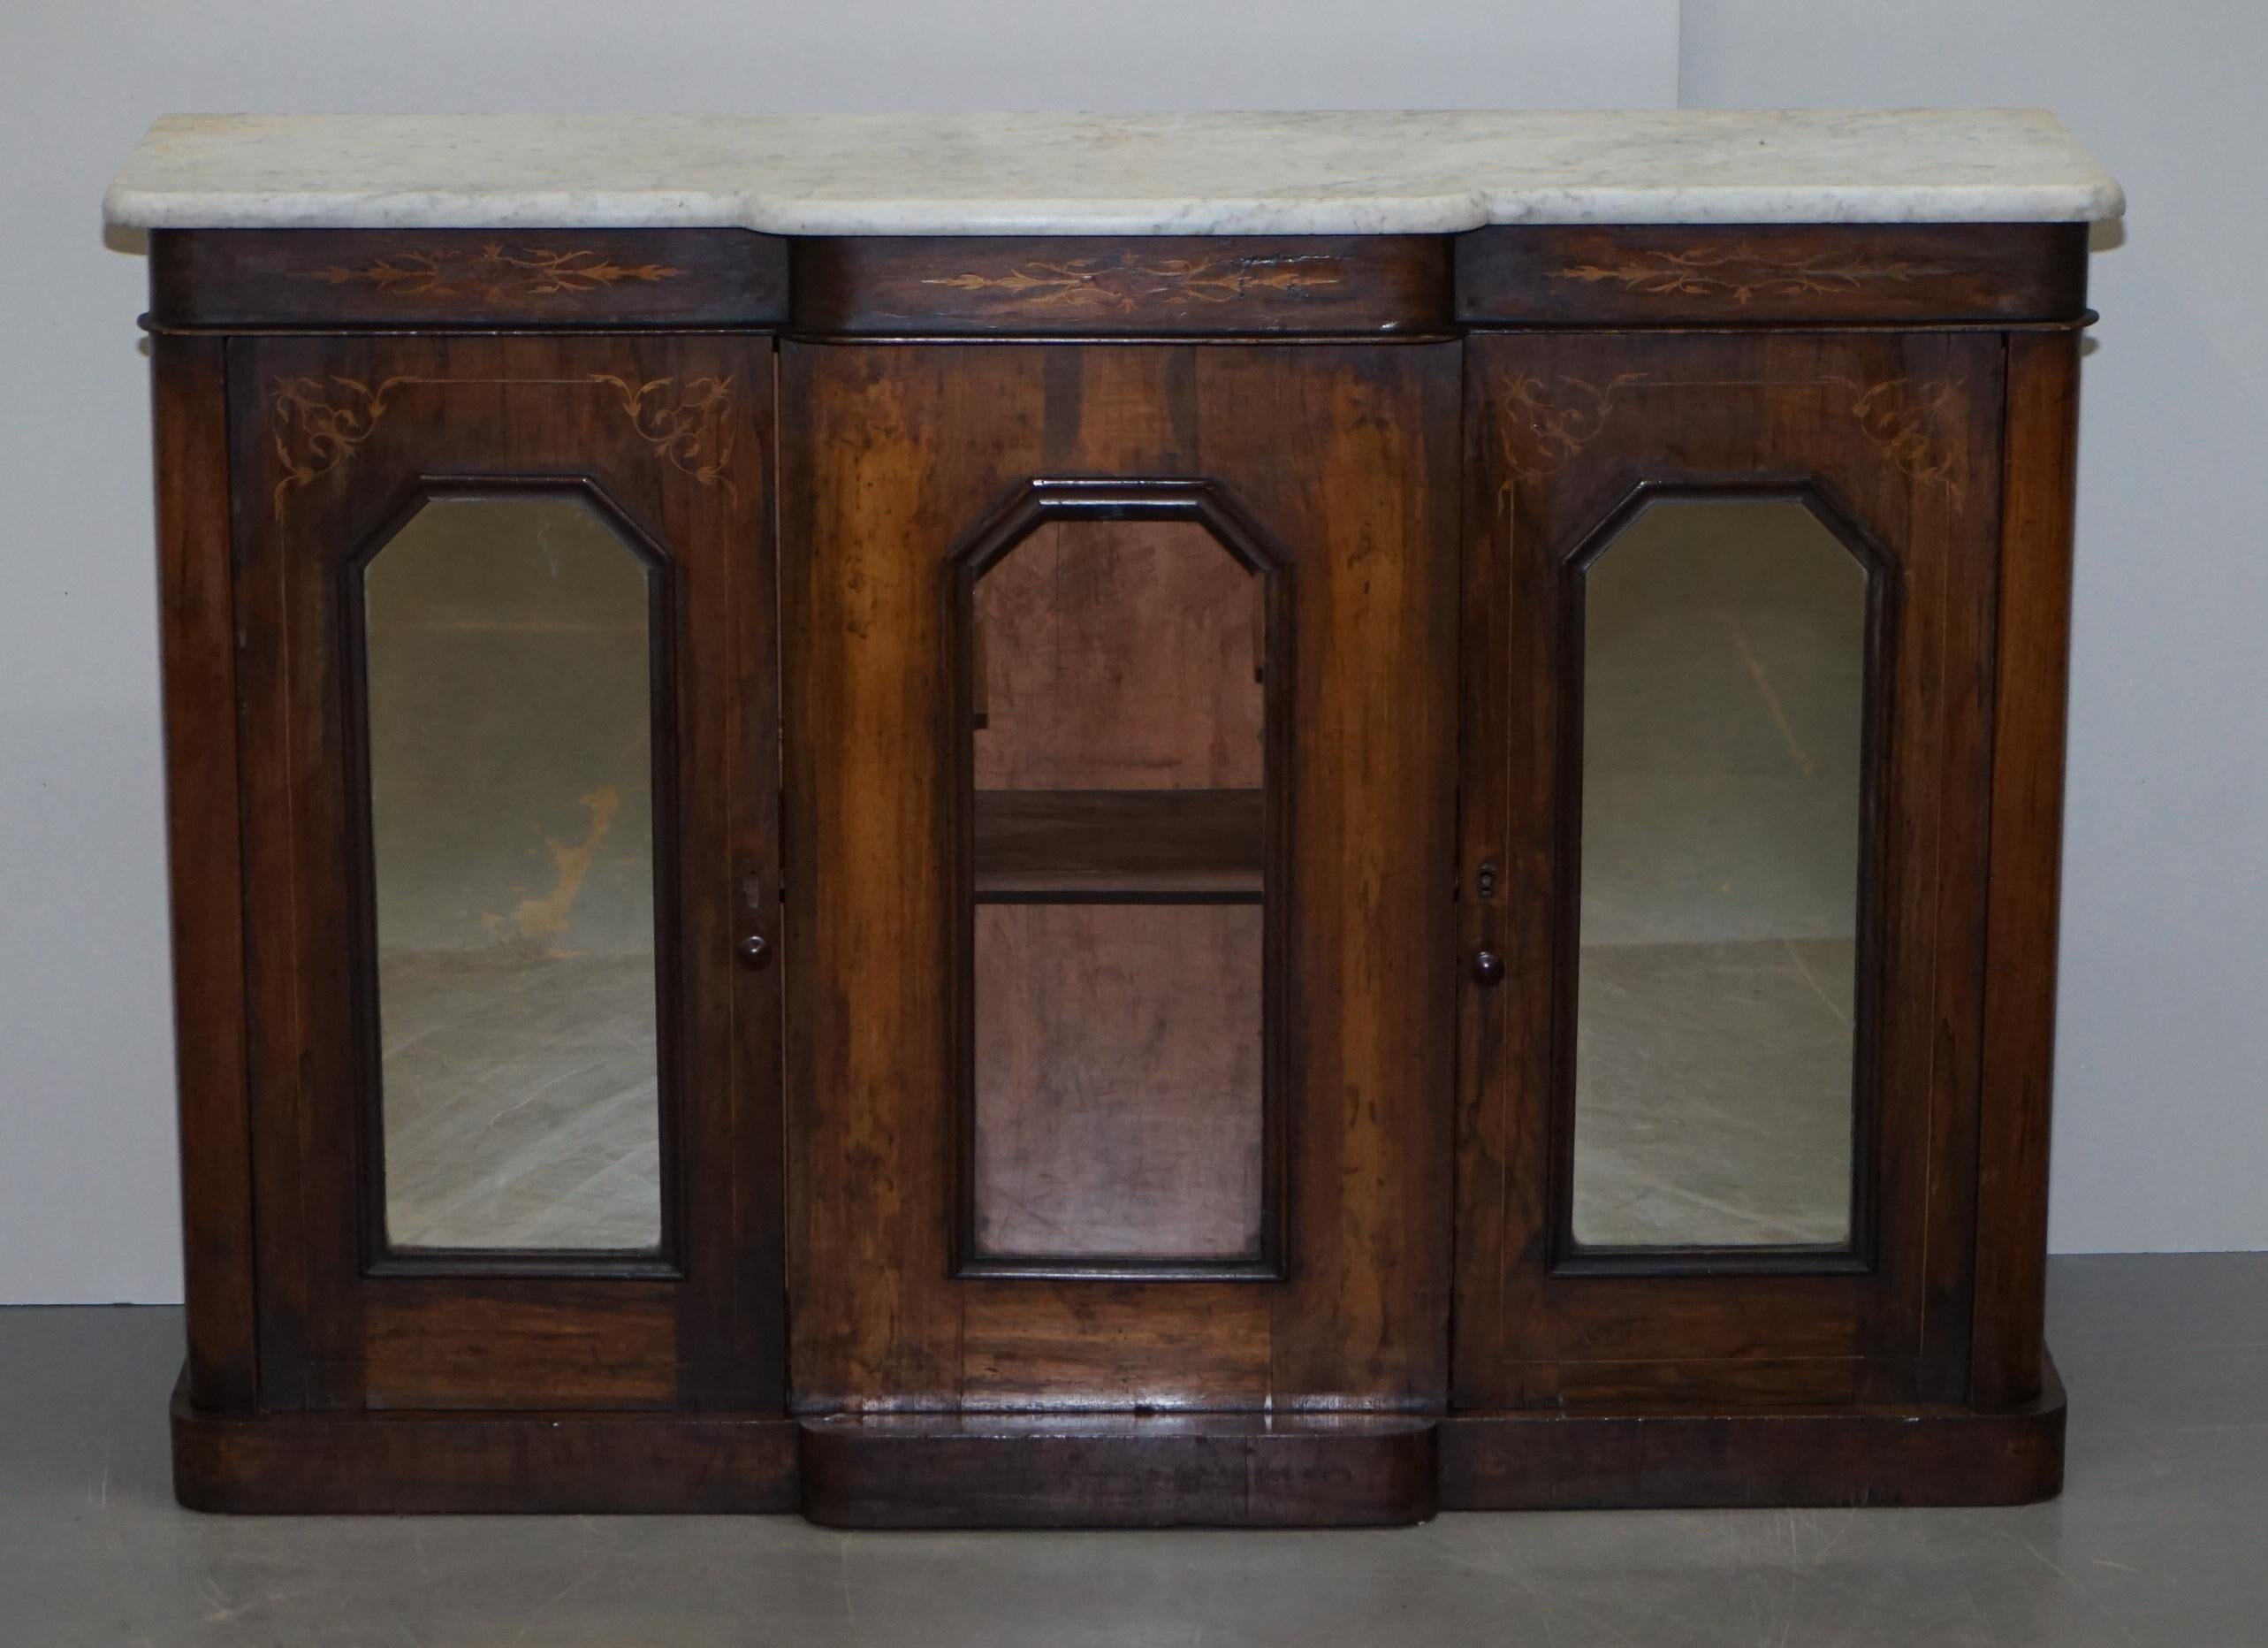 We are delighted to offer for sale this rare original Regency walnut and marble sideboard credenza 

A very good looking decorative and collectable cabinet. This piece was extremely popular in the early 19th century, this is Italian with Marquetry